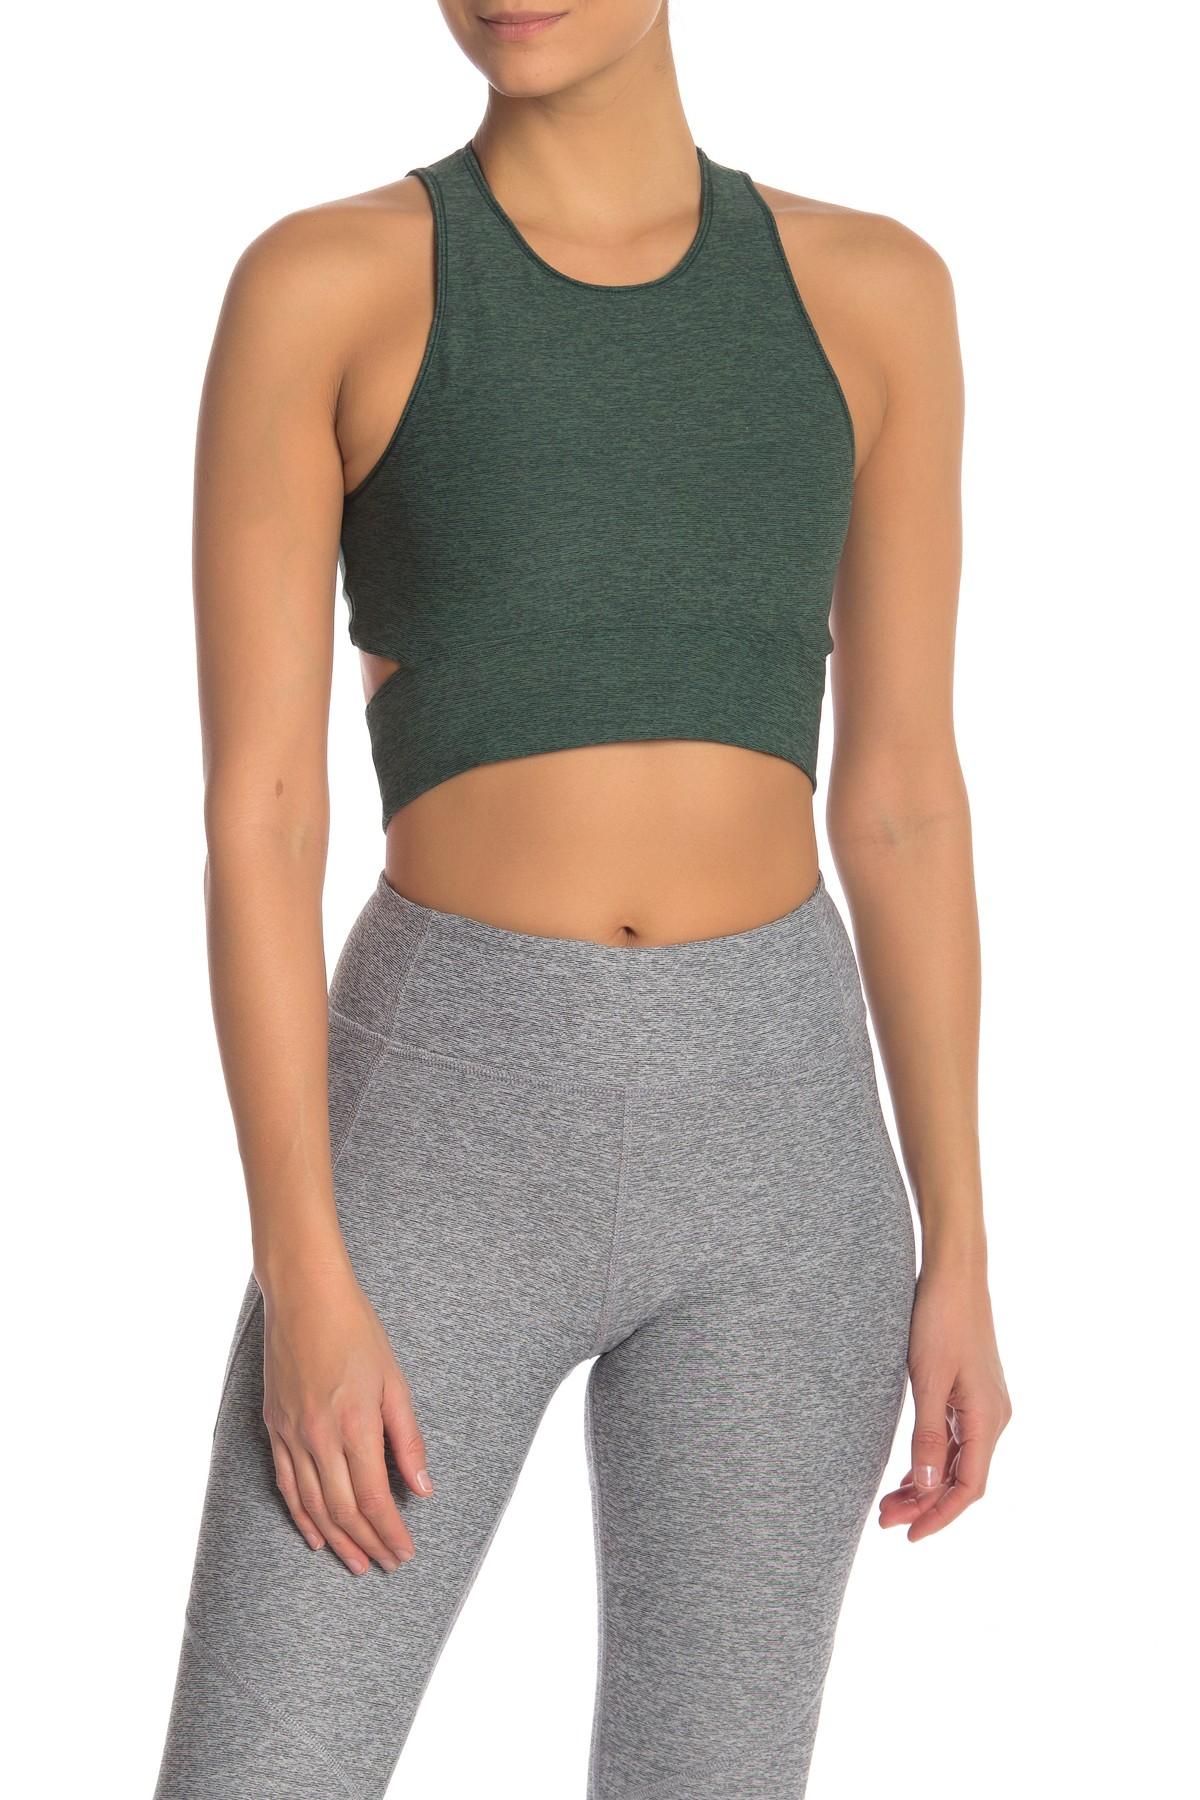 Outdoor Voices Back Cutout Sports Bra